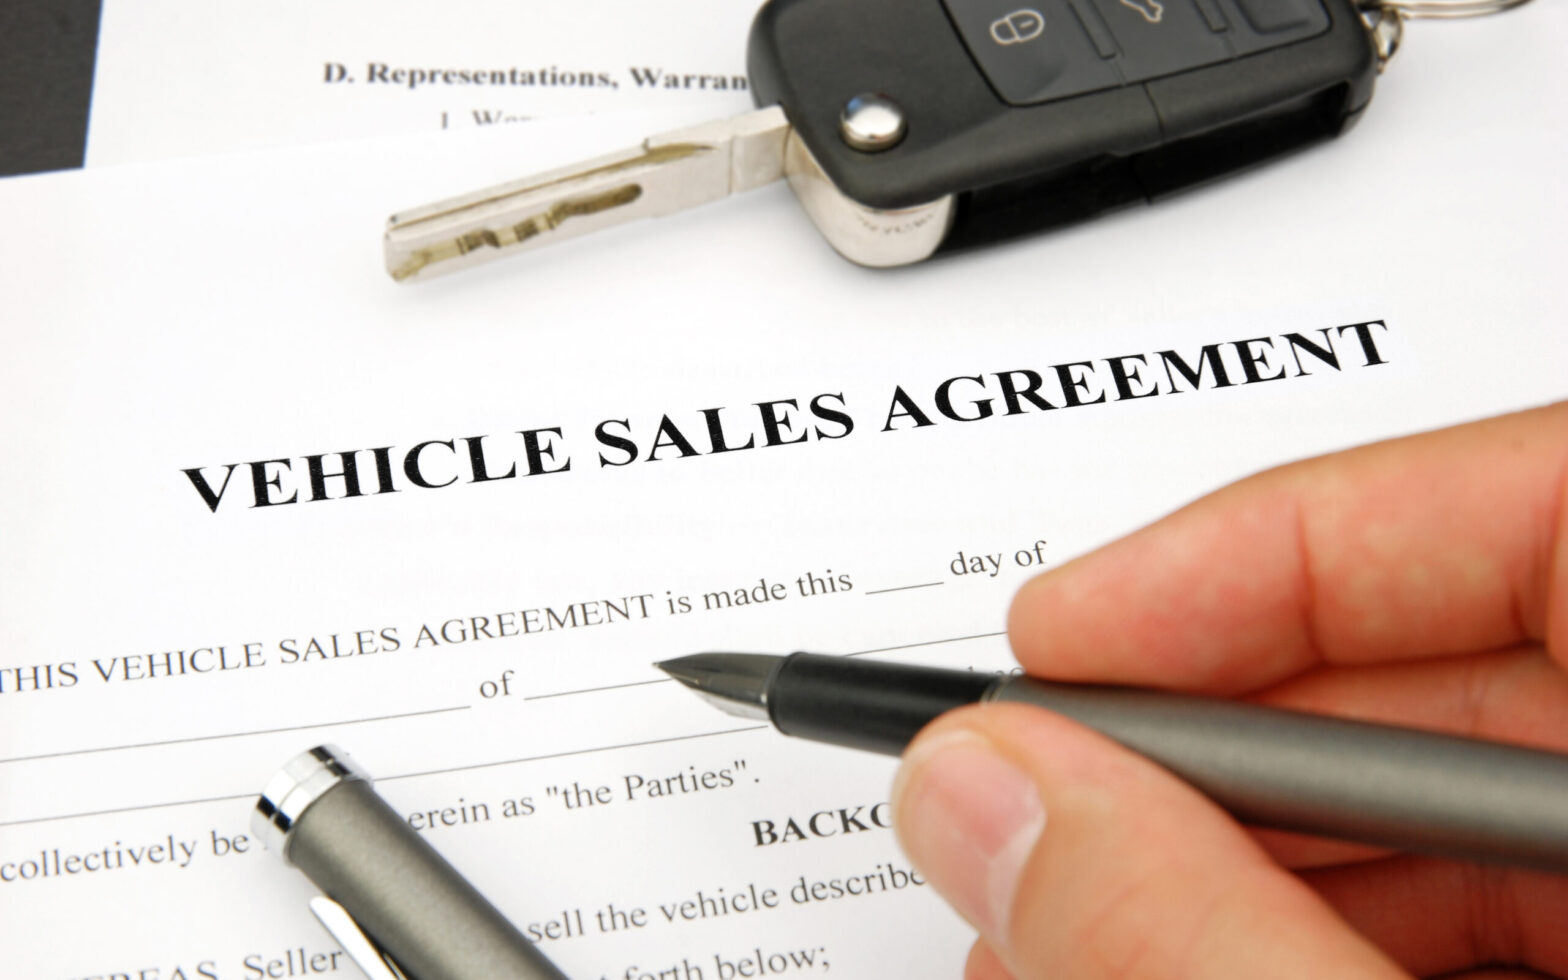 How to hand over vehicles that cannot-be paid for leasing.